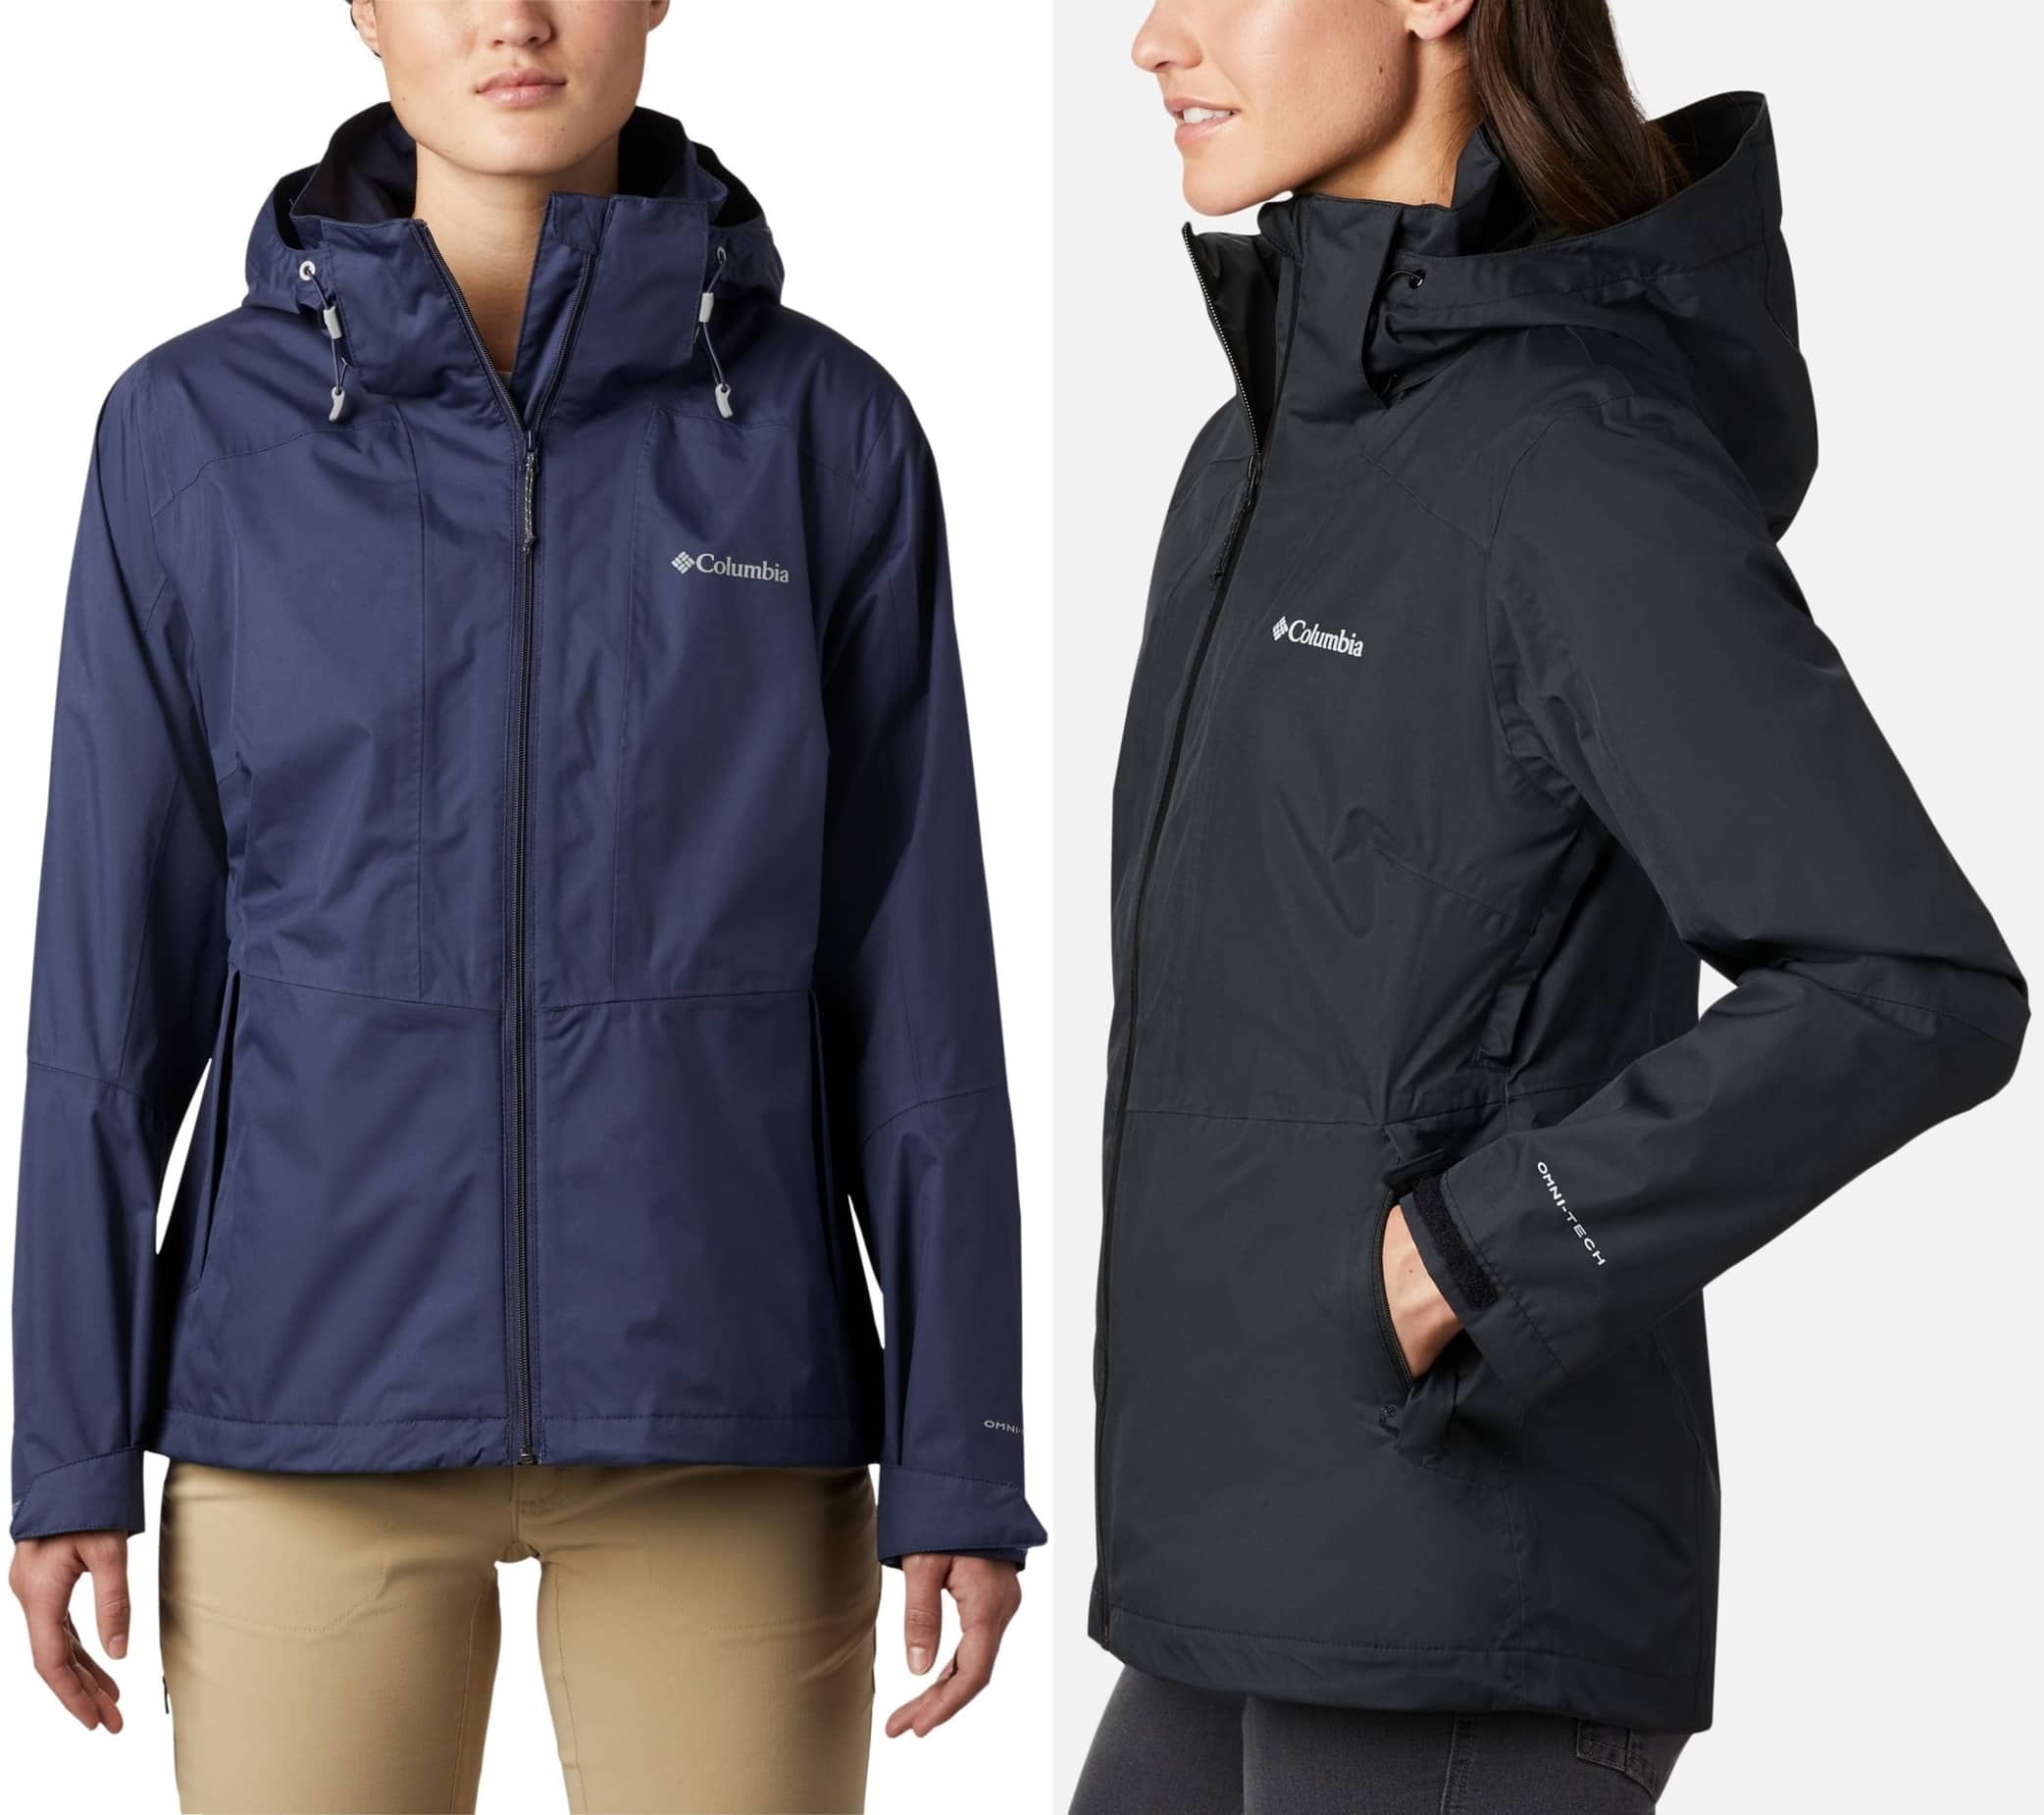 A bold rain jacket with the waterproof-breathability you need to stay comfortable